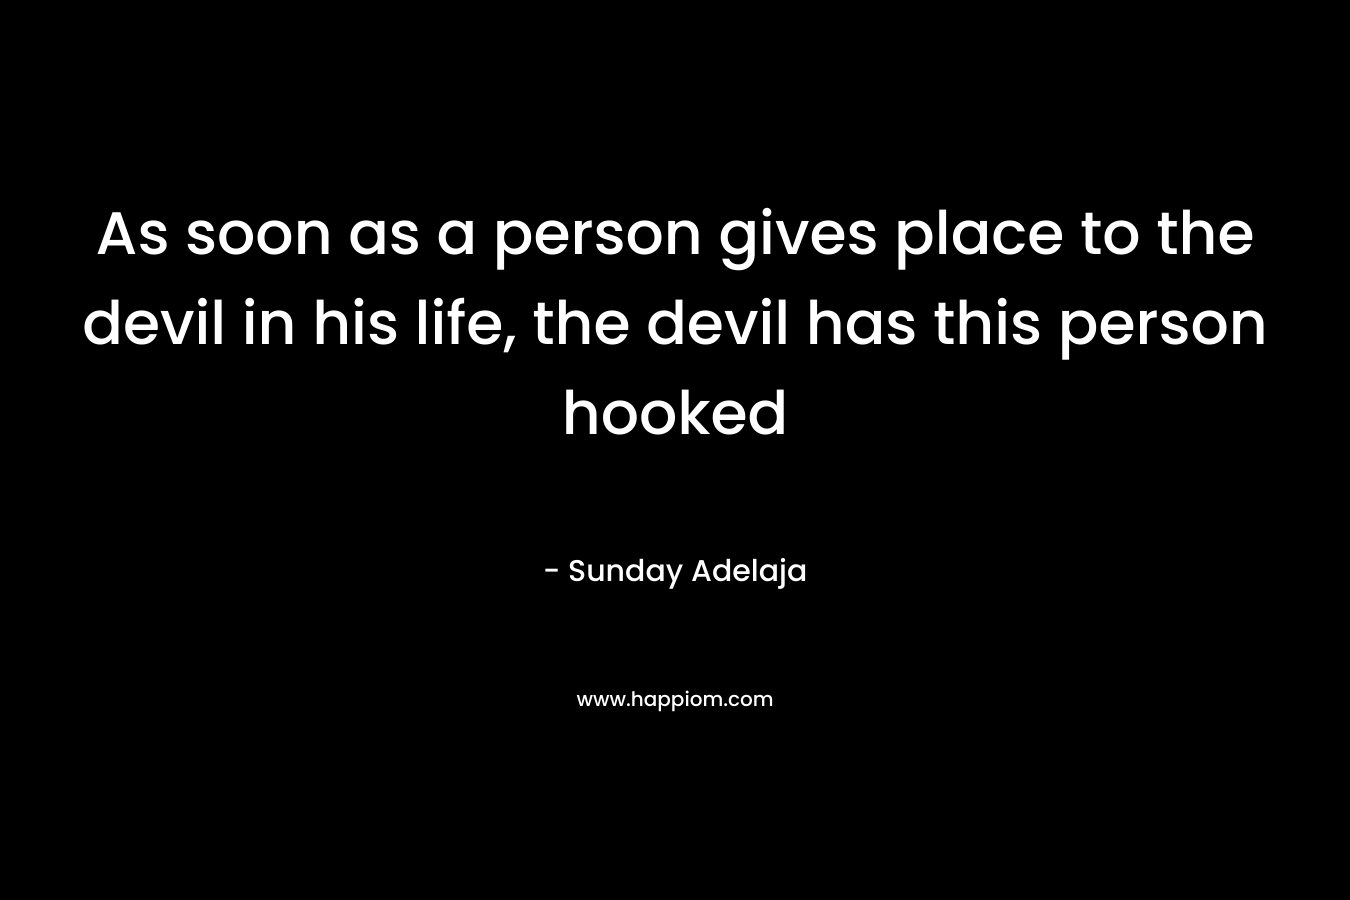 As soon as a person gives place to the devil in his life, the devil has this person hooked